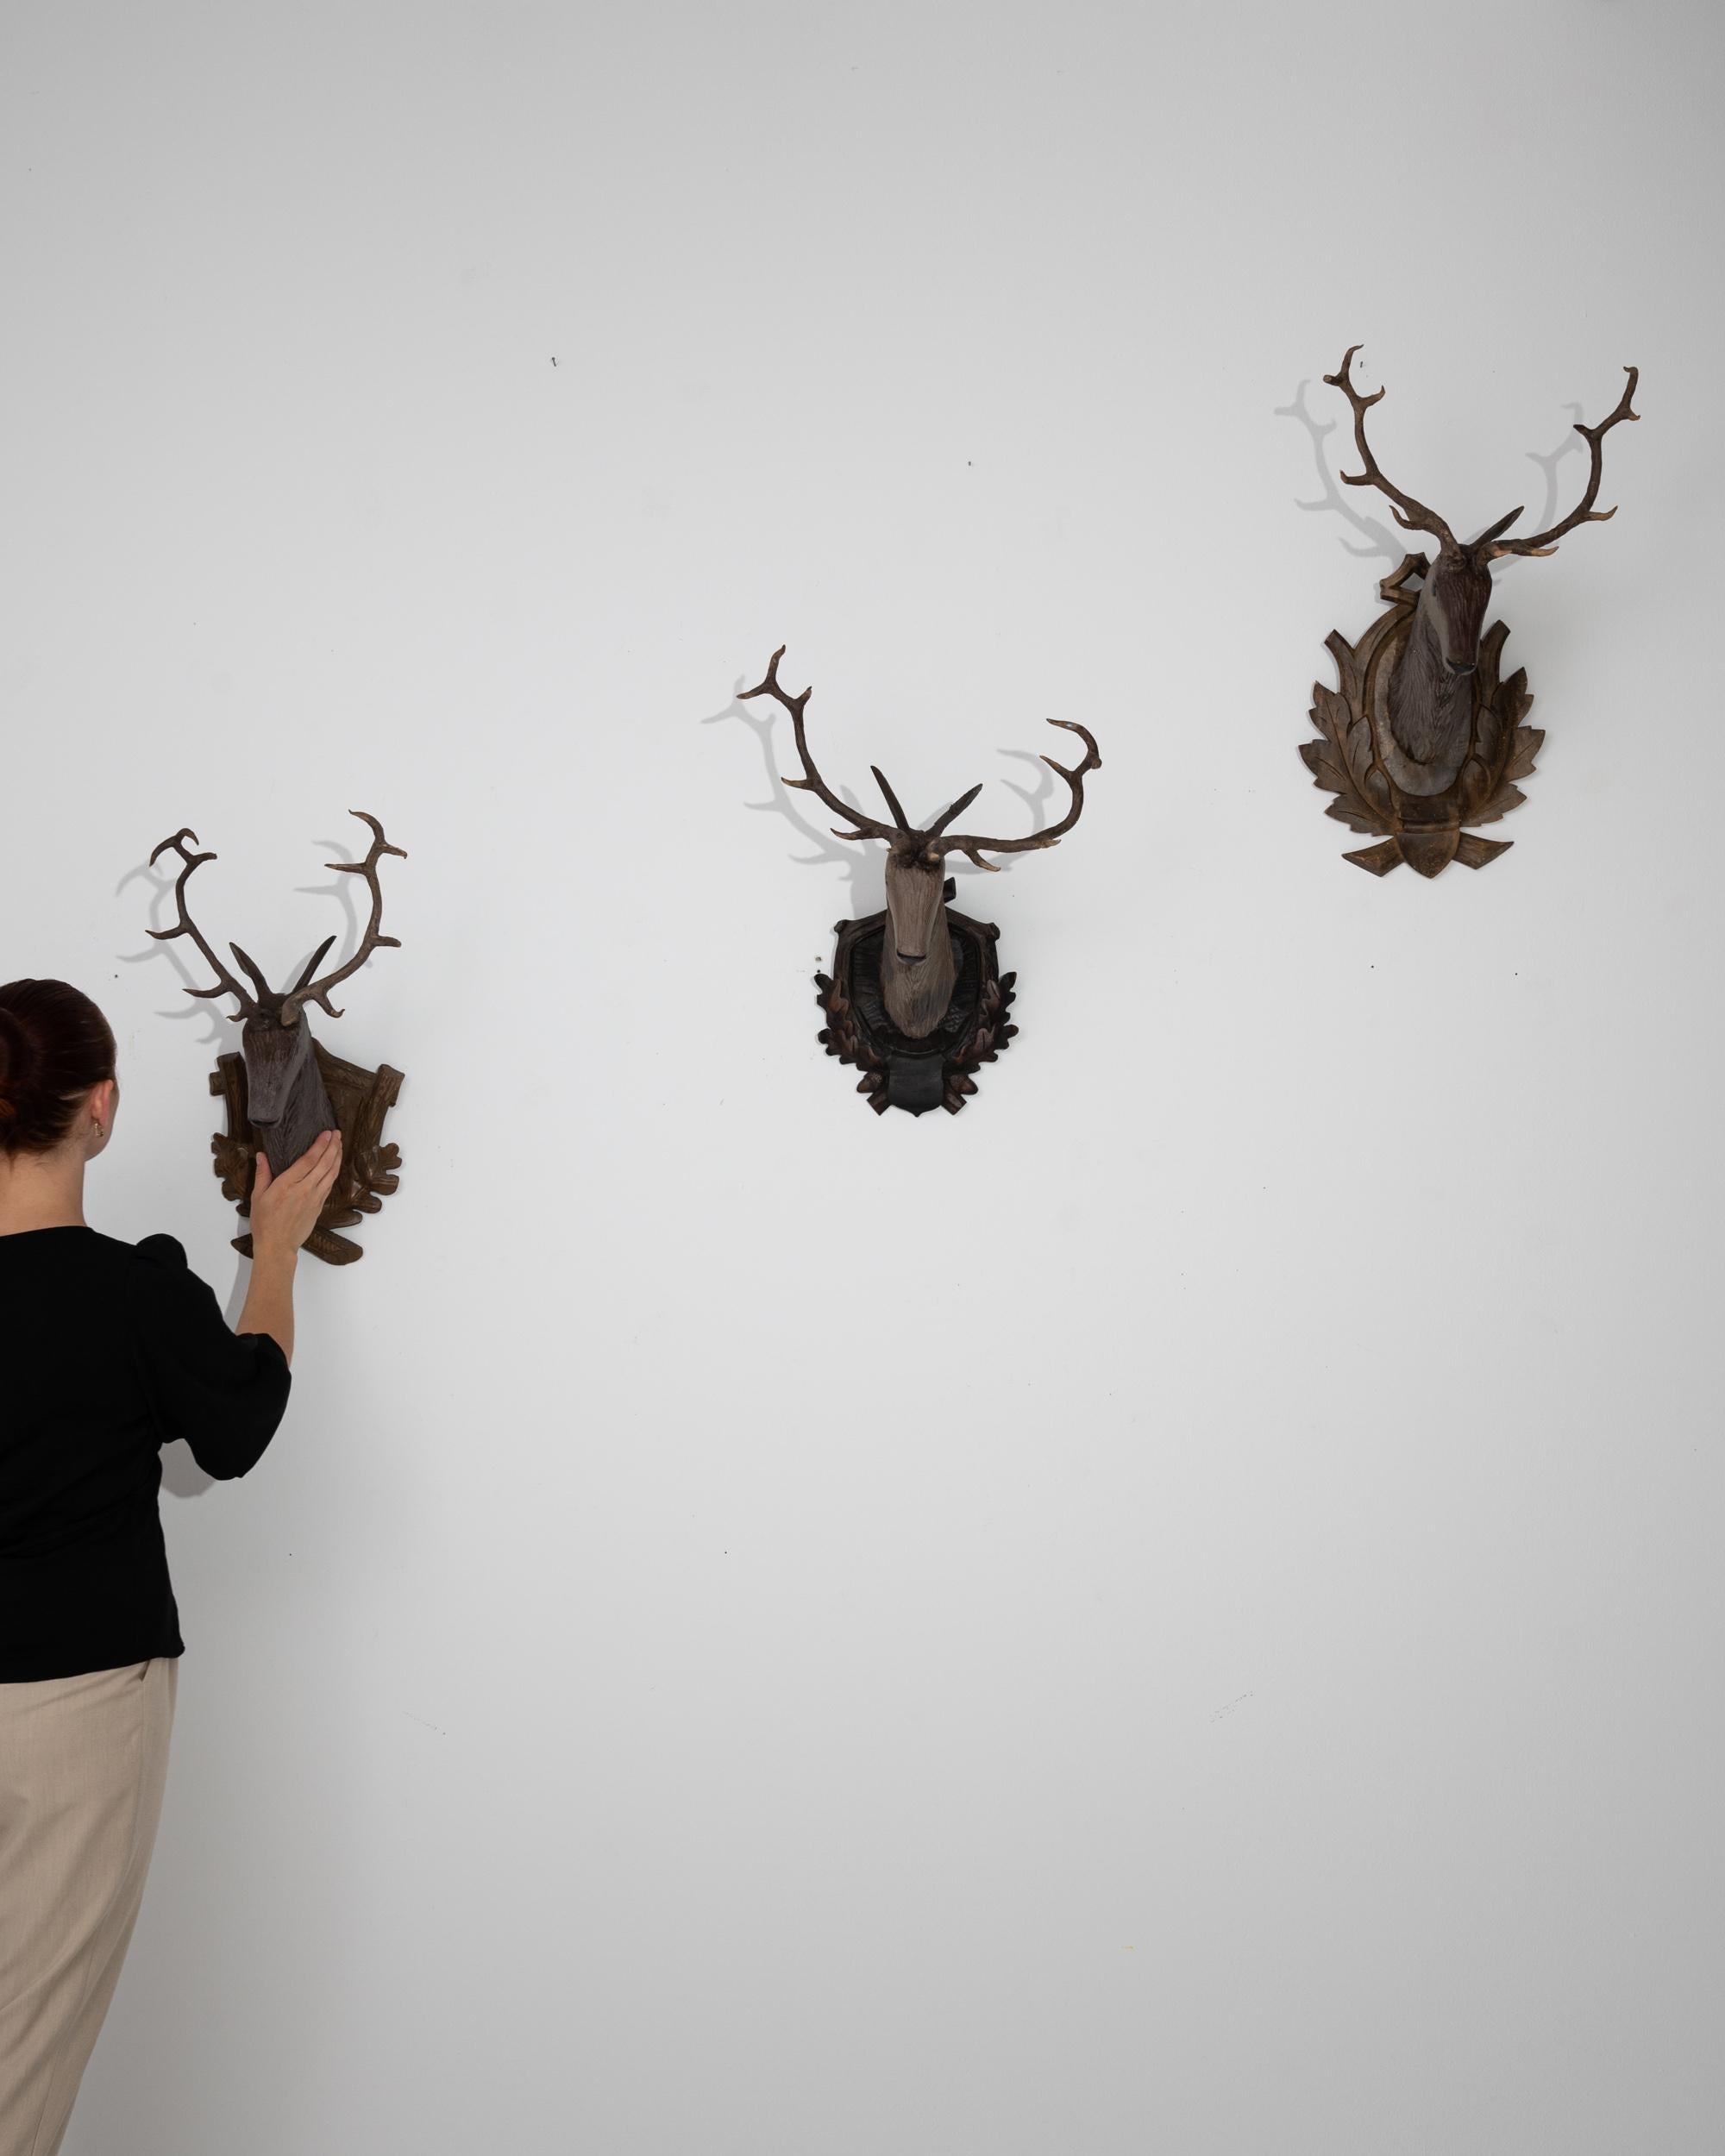 This set of three 20th Century Czech wooden deer decorations encapsulates the rustic beauty of nature's wild fauna. Each piece is meticulously carved with an attention to detail that brings the essence of the forest into your home. The rich, dark